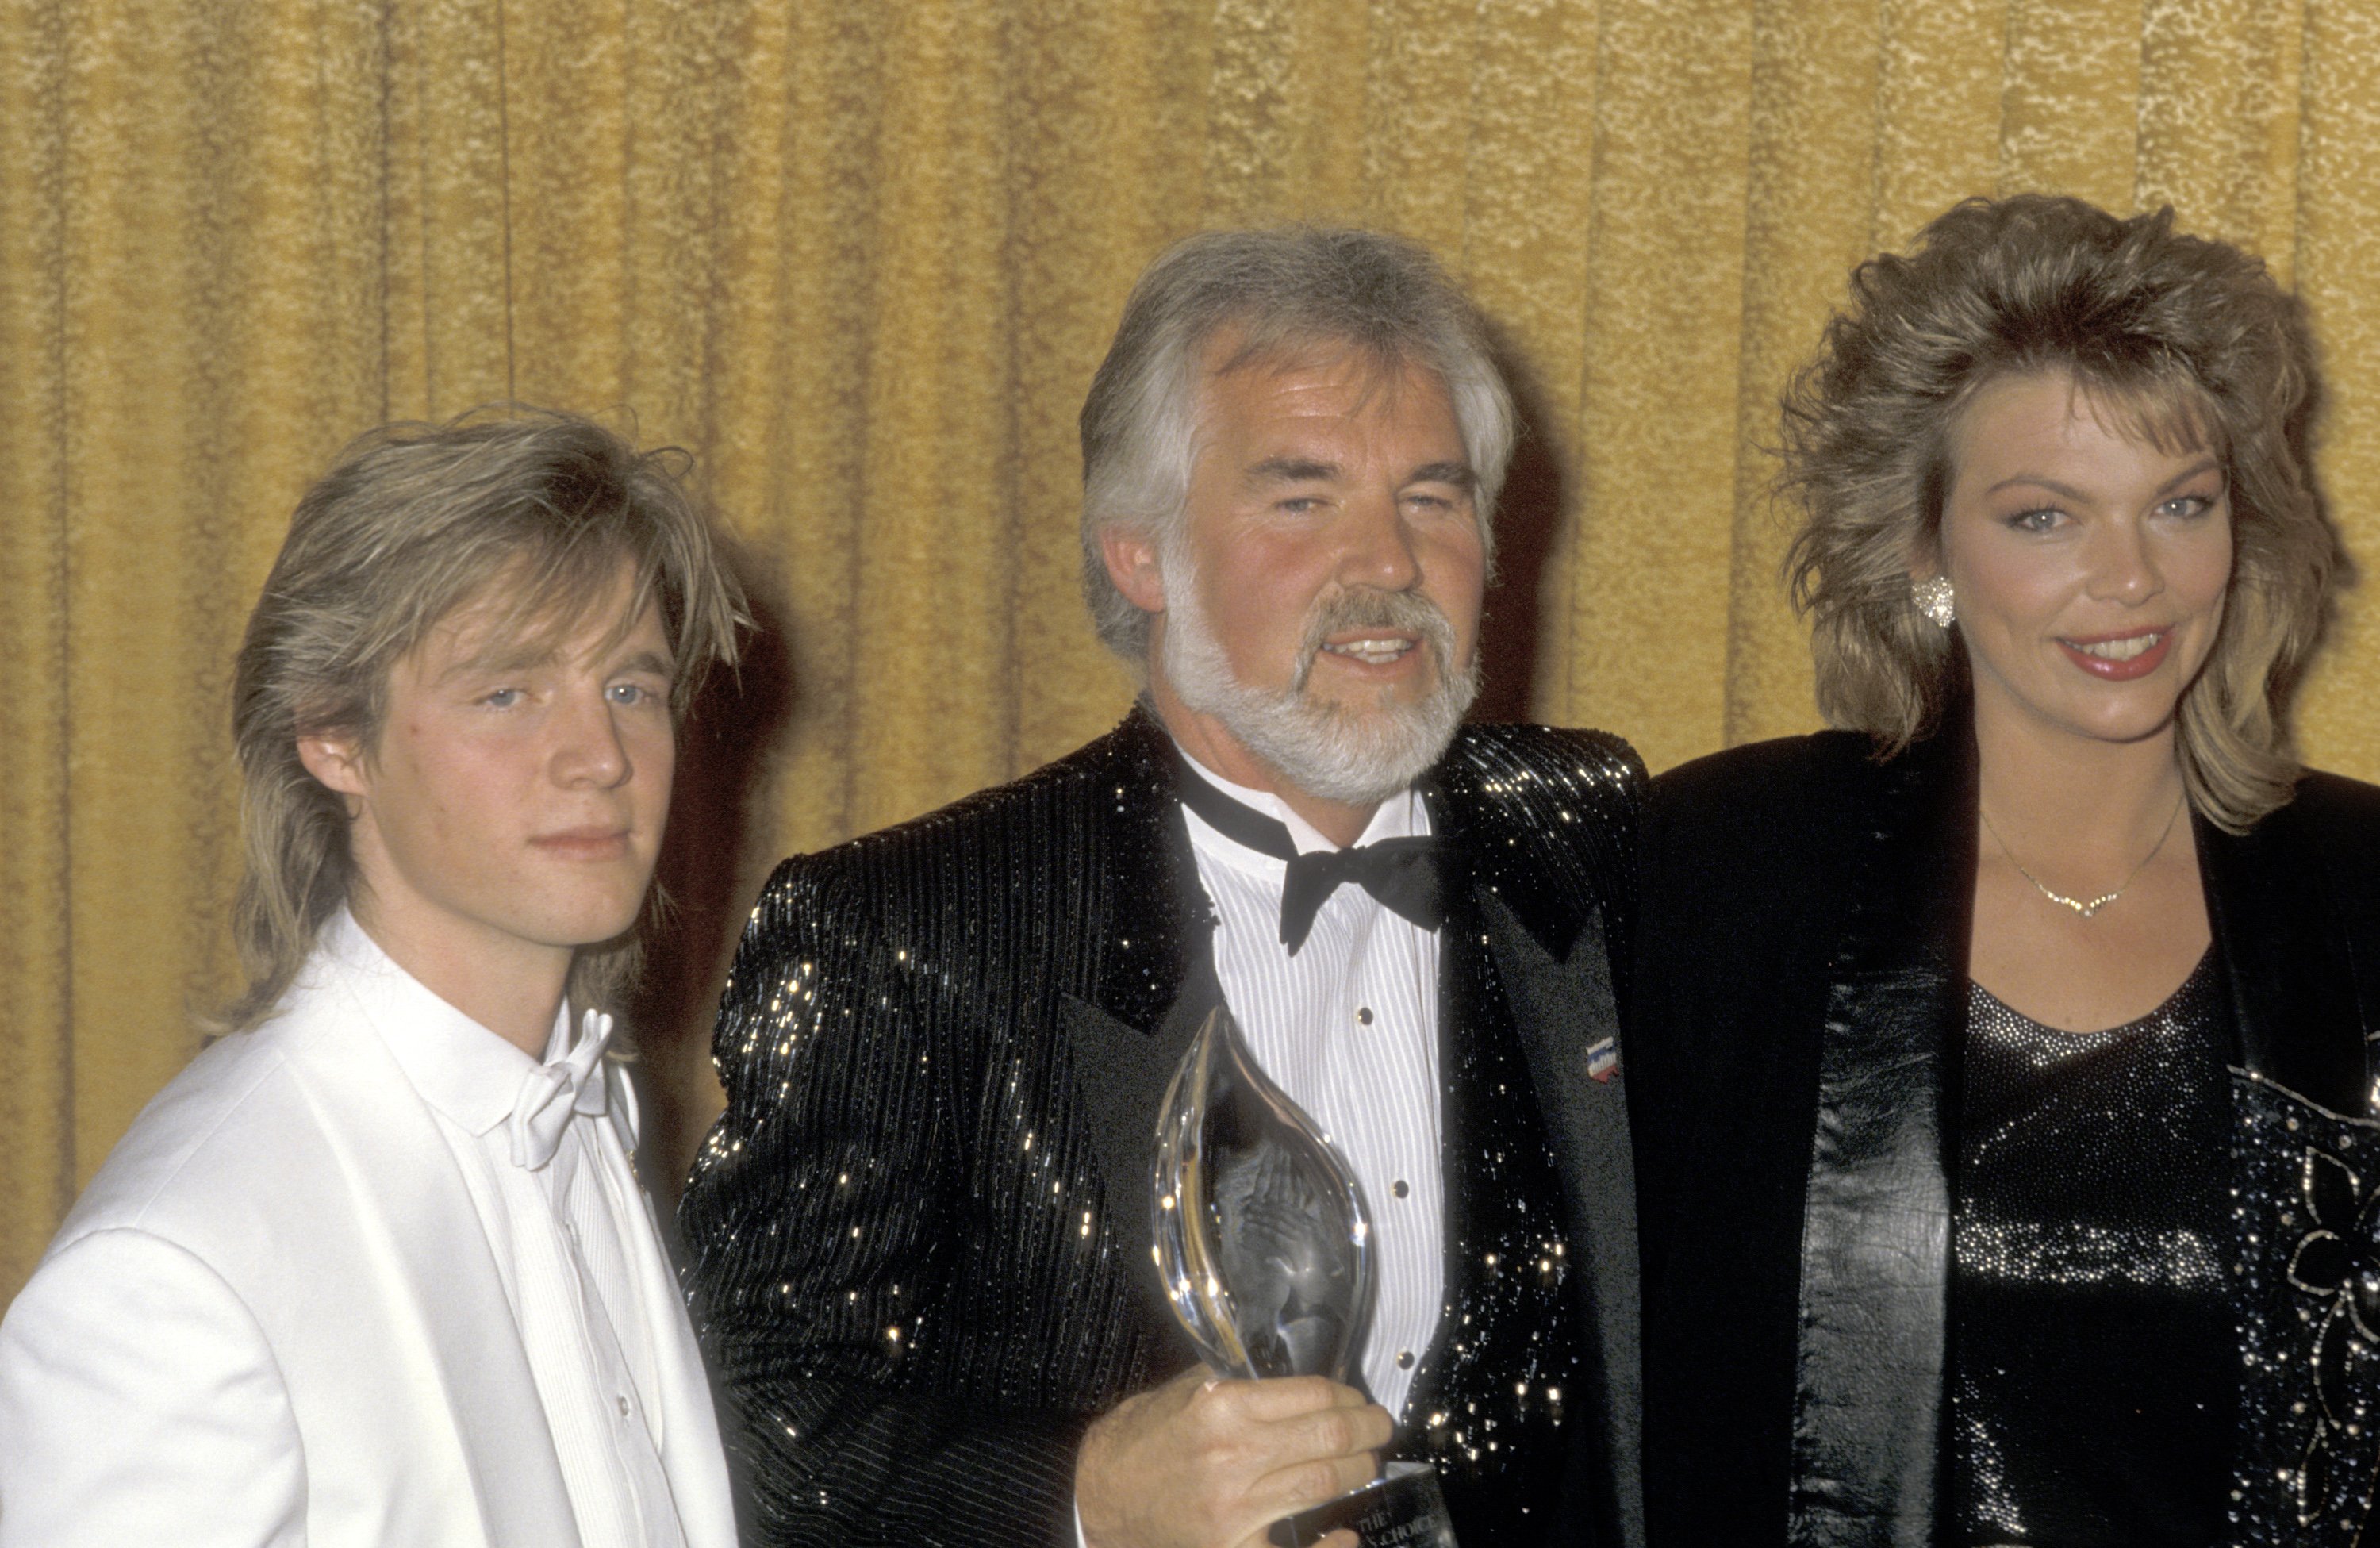 Kenny Rogers is pictured with his children, Kenny Rogers Jr. and Carole Rogers, at the 12th Annual People's Choice Awards on March 11, 1986 at the Santa Monica Civic Auditorium in Santa Monica, California |  Source: Getty Images